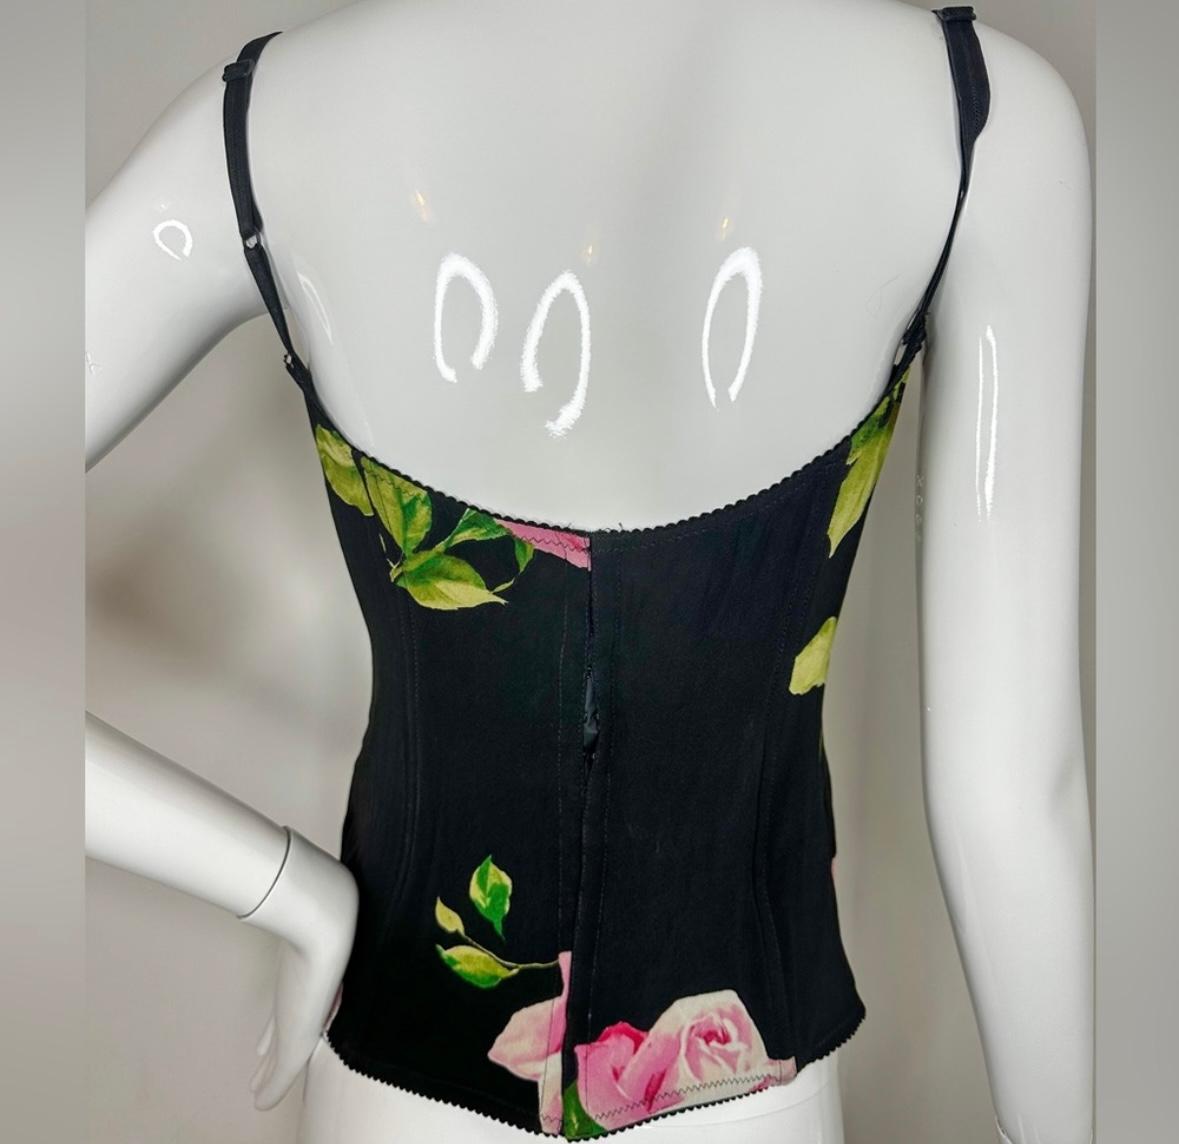 Dolce Gabbana 2000 floral silk corset top In Good Condition For Sale In Annandale, VA